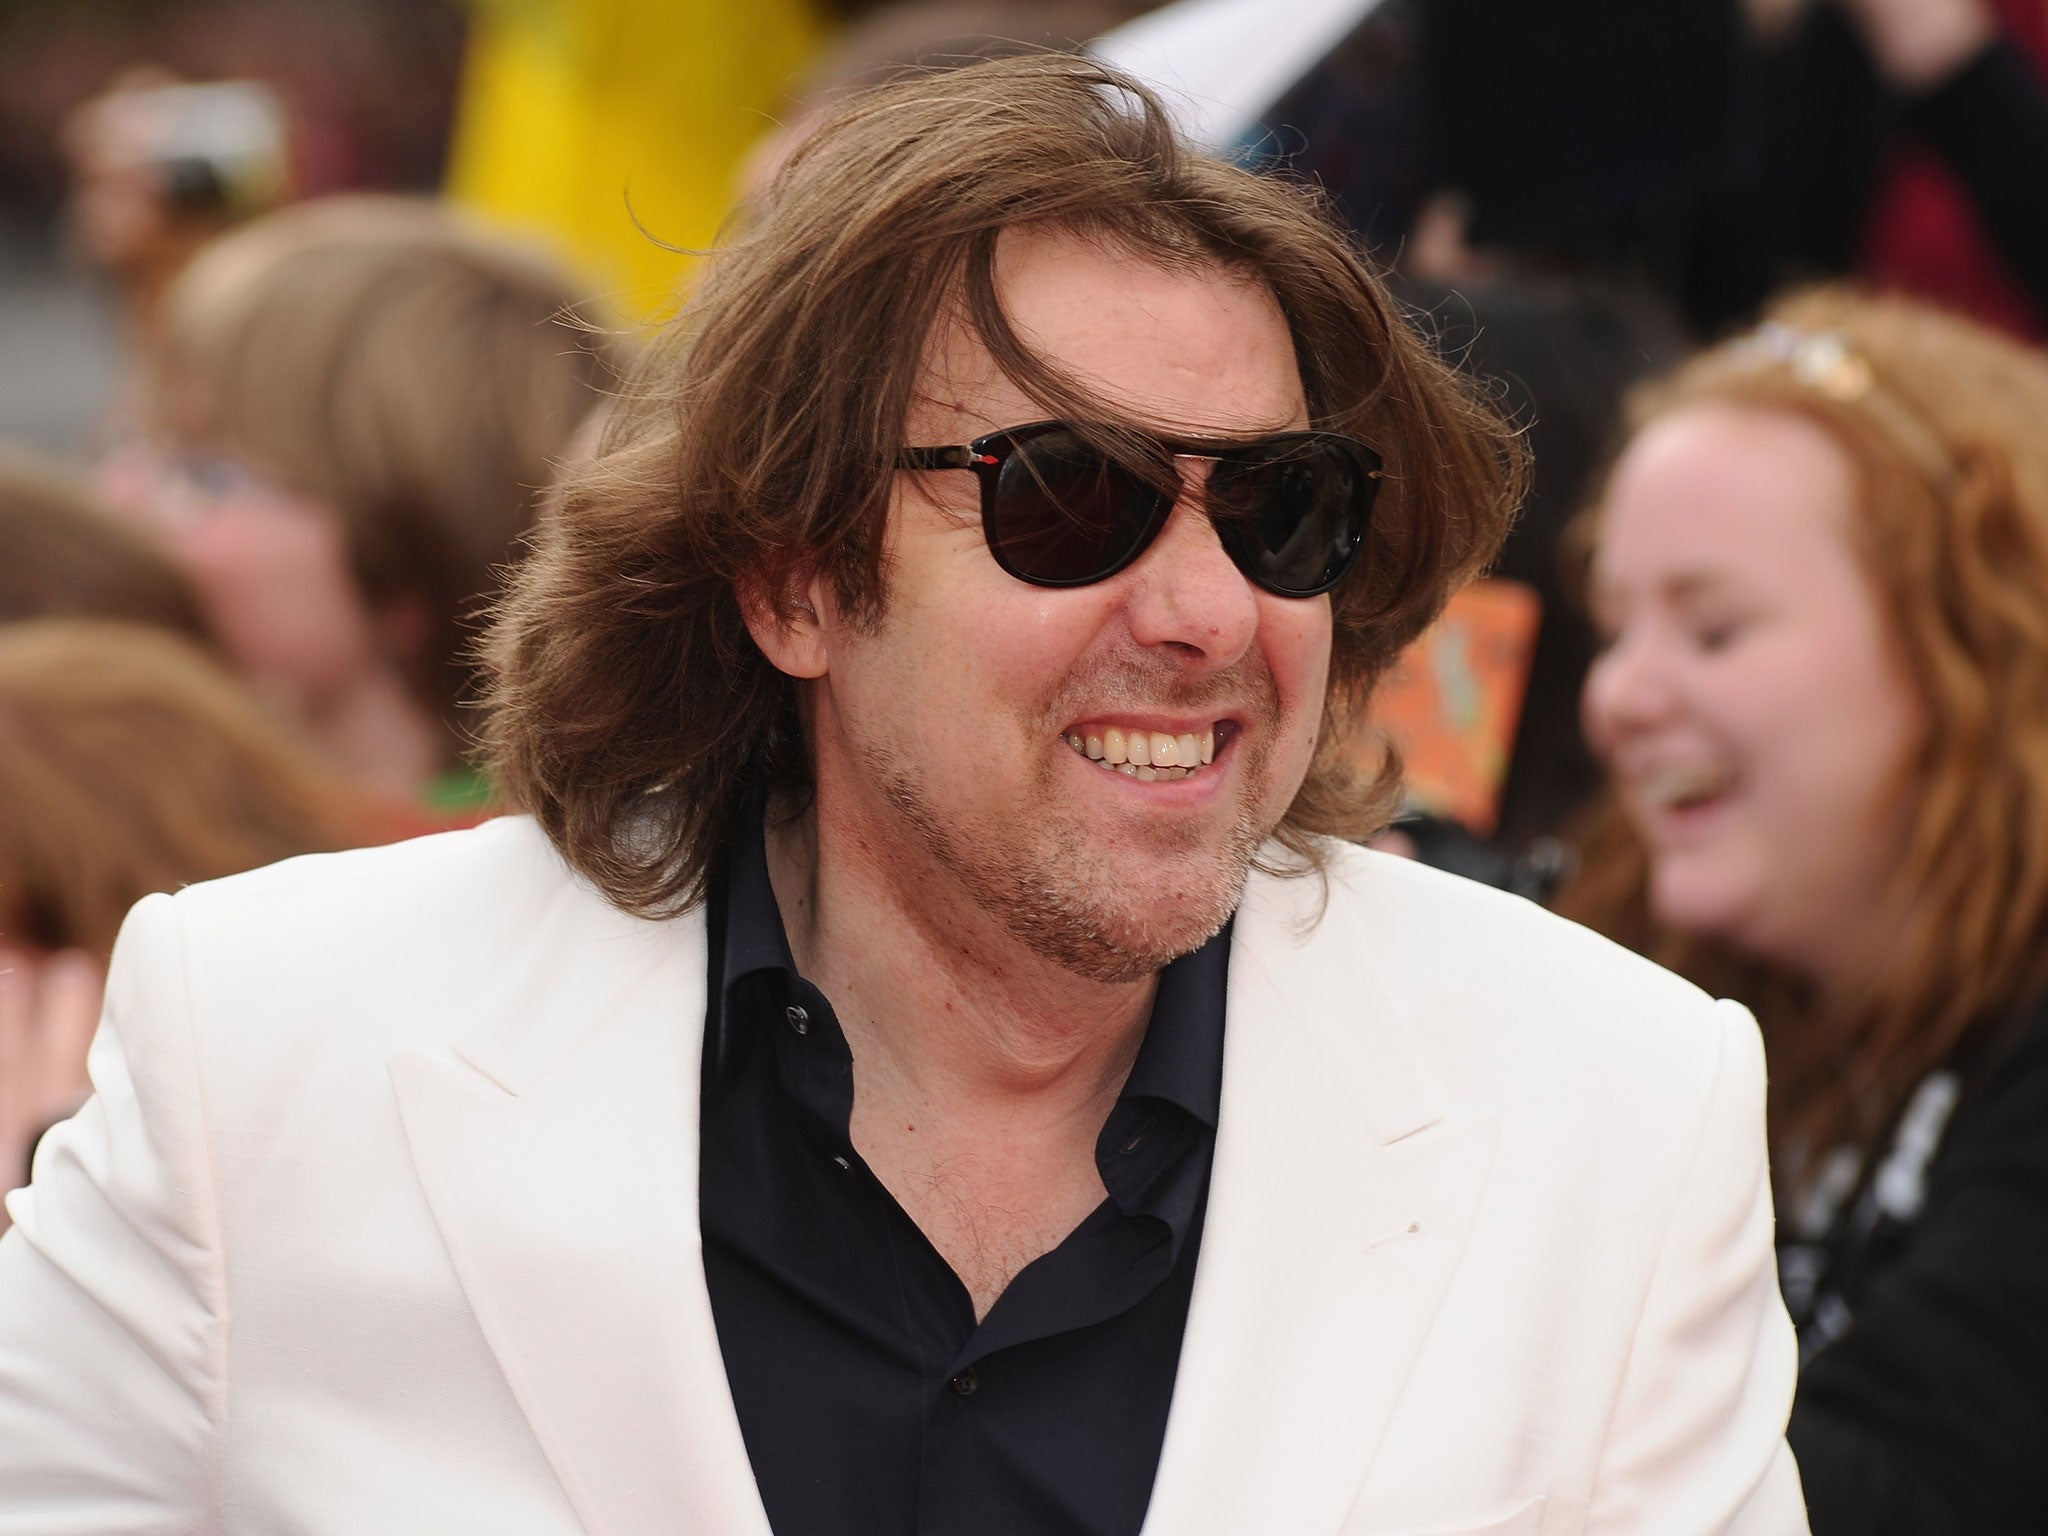 Jonathan Ross has been presenting his talk show on ITV since 2011